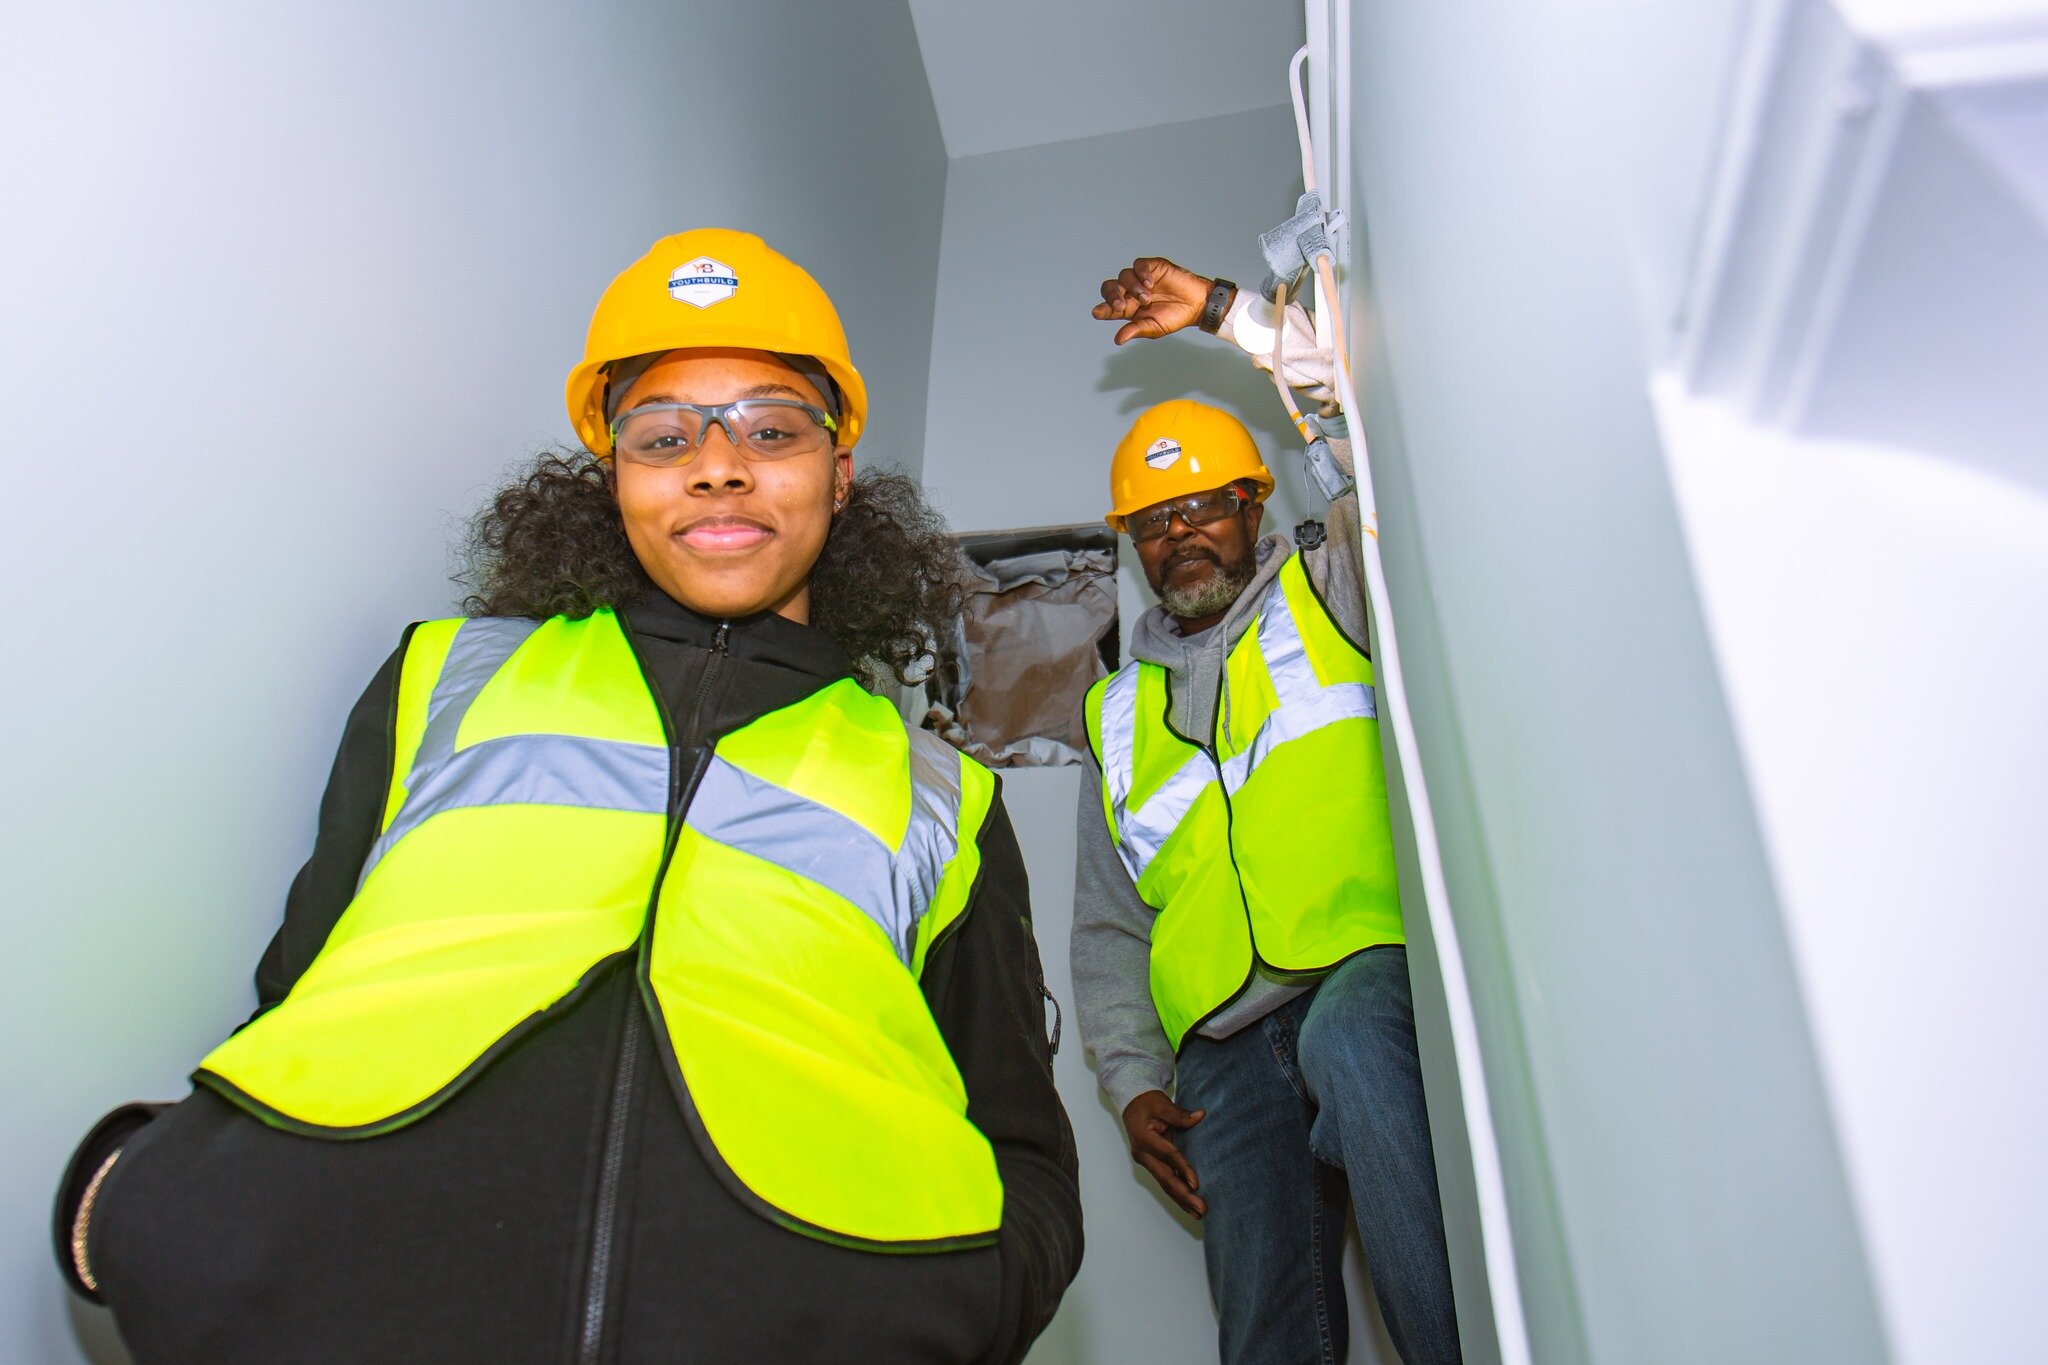 An alum himself, Terry Lang has spent the decade as the Senior Vocational Instructor at YouthBuild Newark. Since he first started working in our YouthBuild program, he has personally helped over 750 students obtain their National Center for Construct